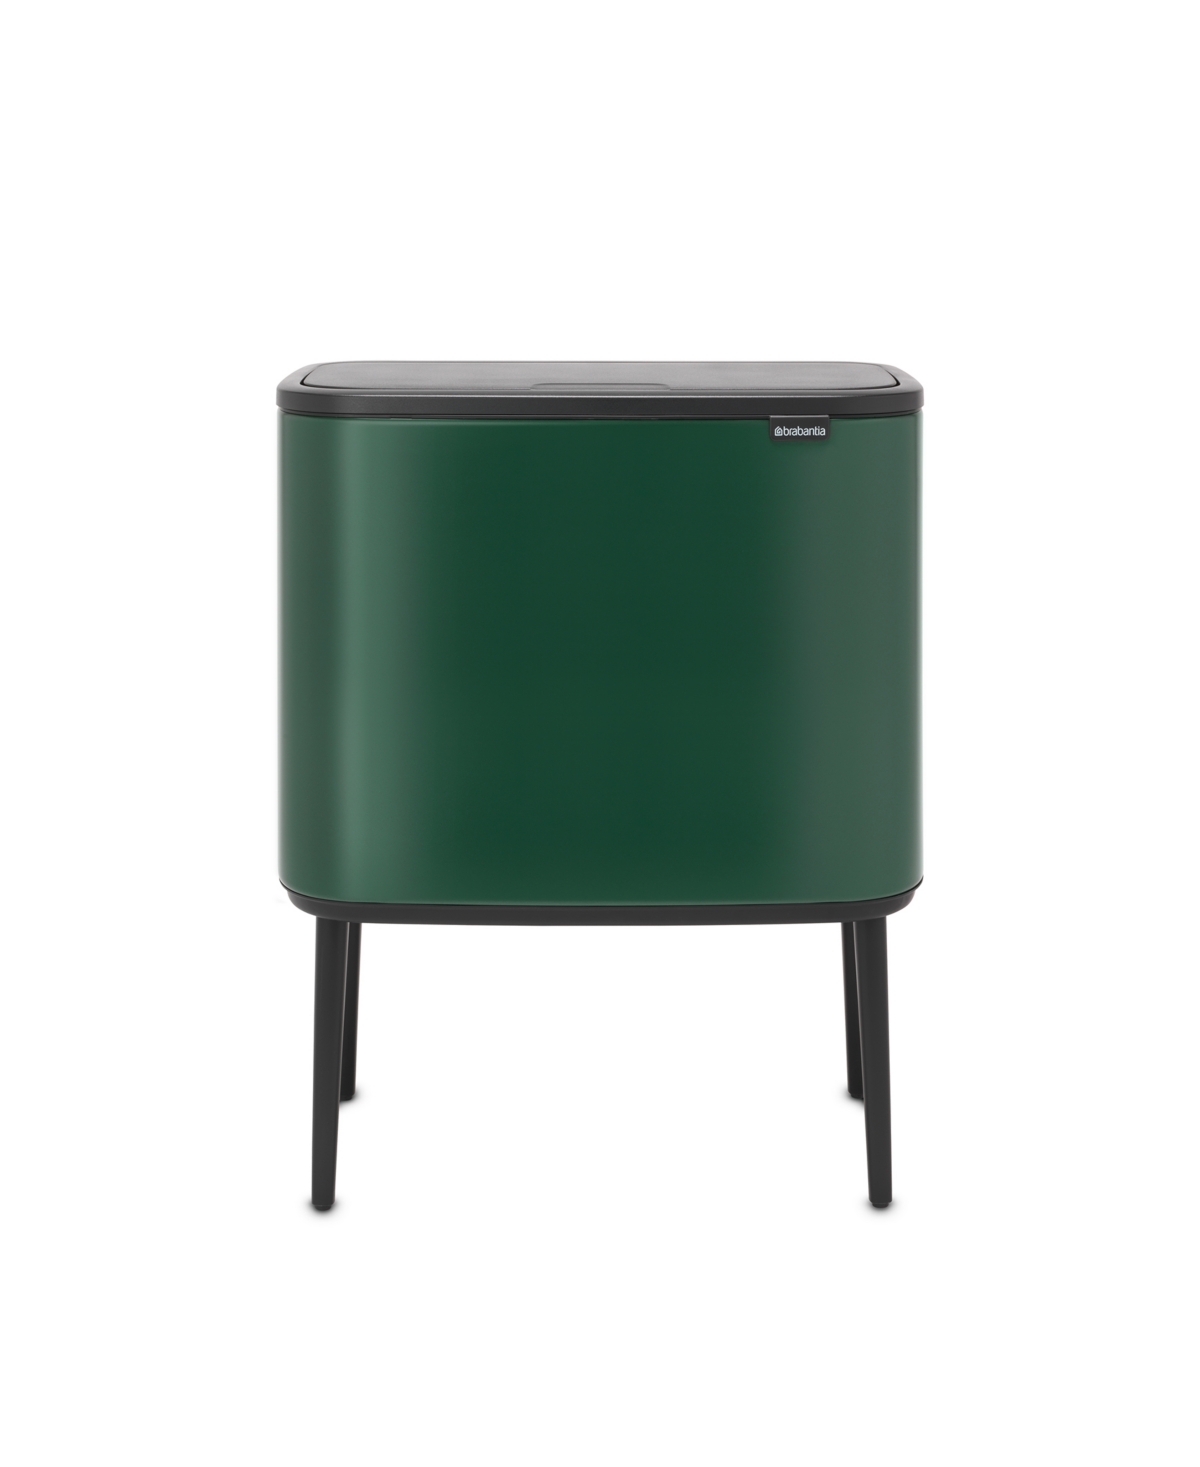 Bo Touch Top Trash Can, 9.5 Gallon, 36 Liter - Pine Green